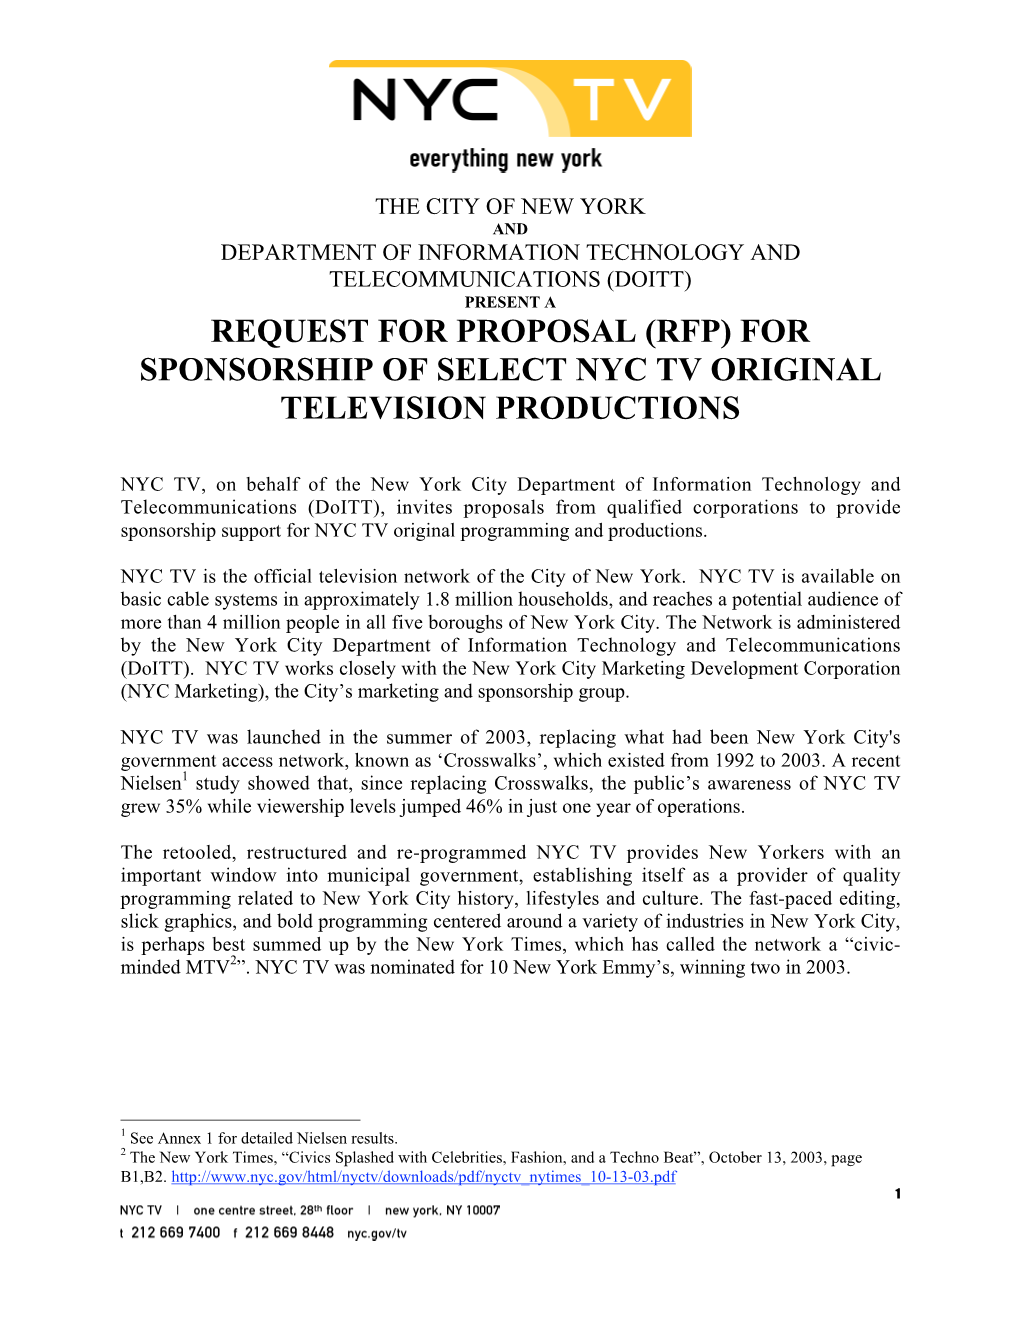 Request for Proposal (Rfp) for Sponsorship of Select Nyc Tv Original Television Productions